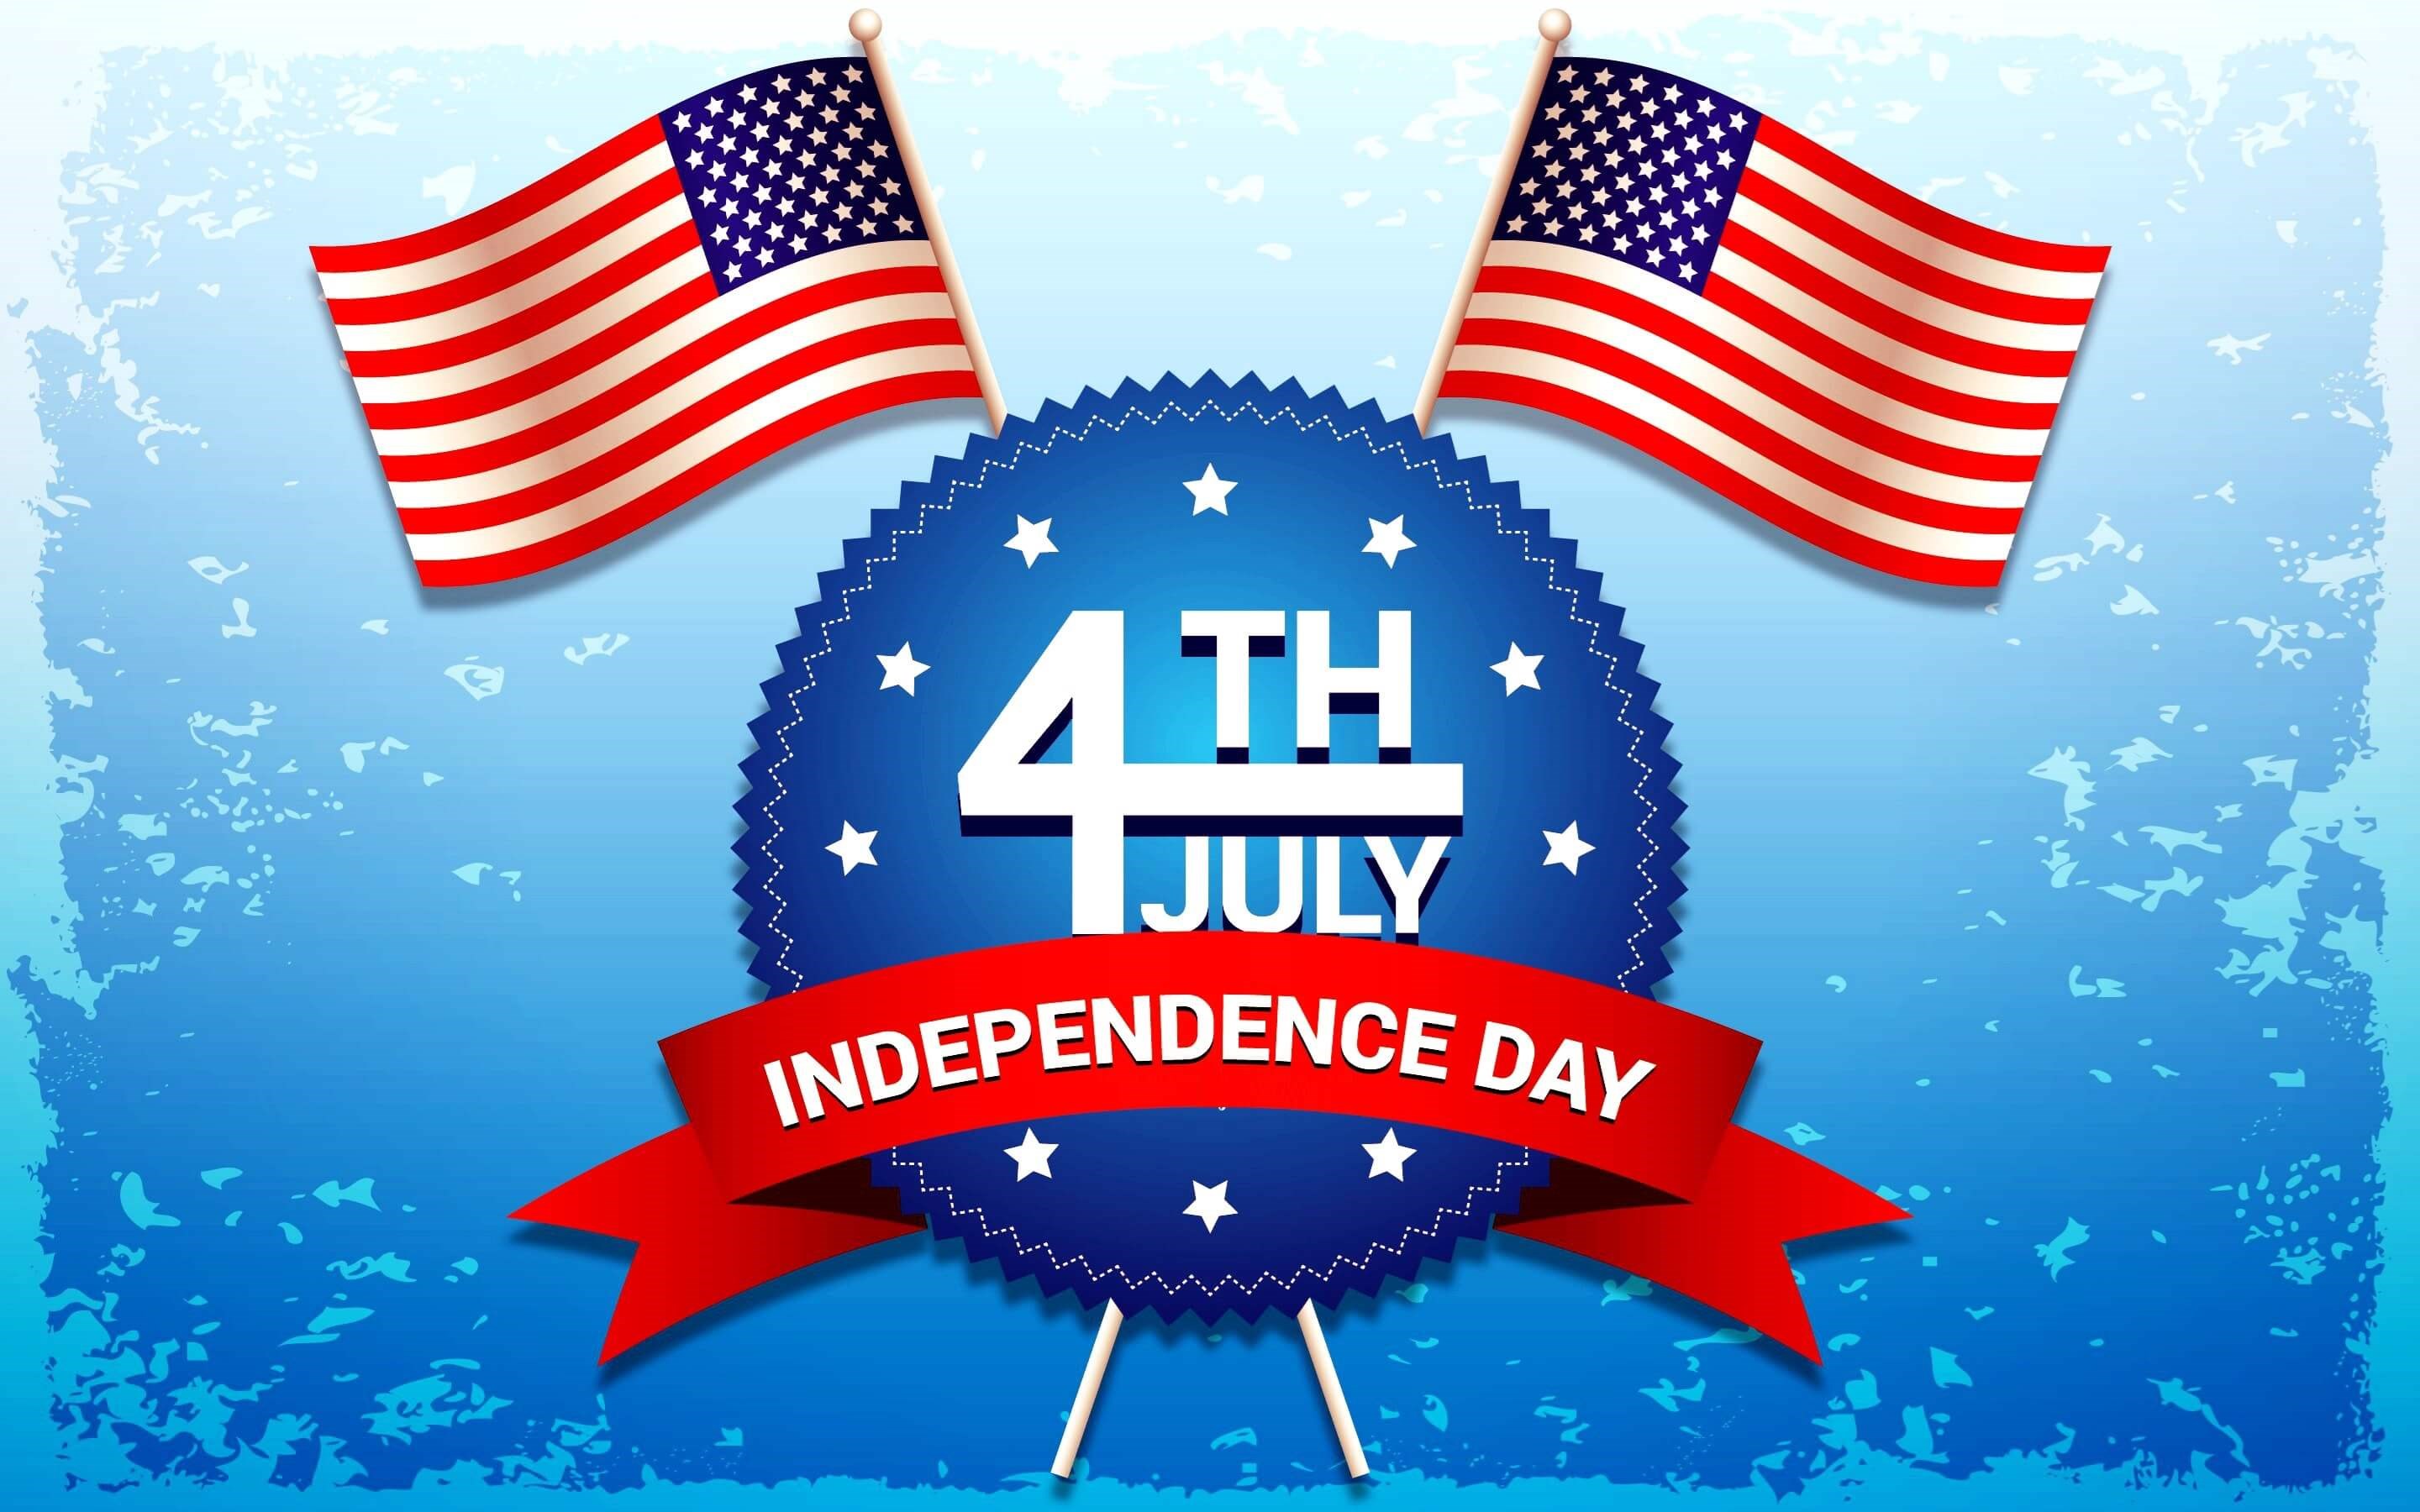 8 surprising facts about U.S. Independence Day